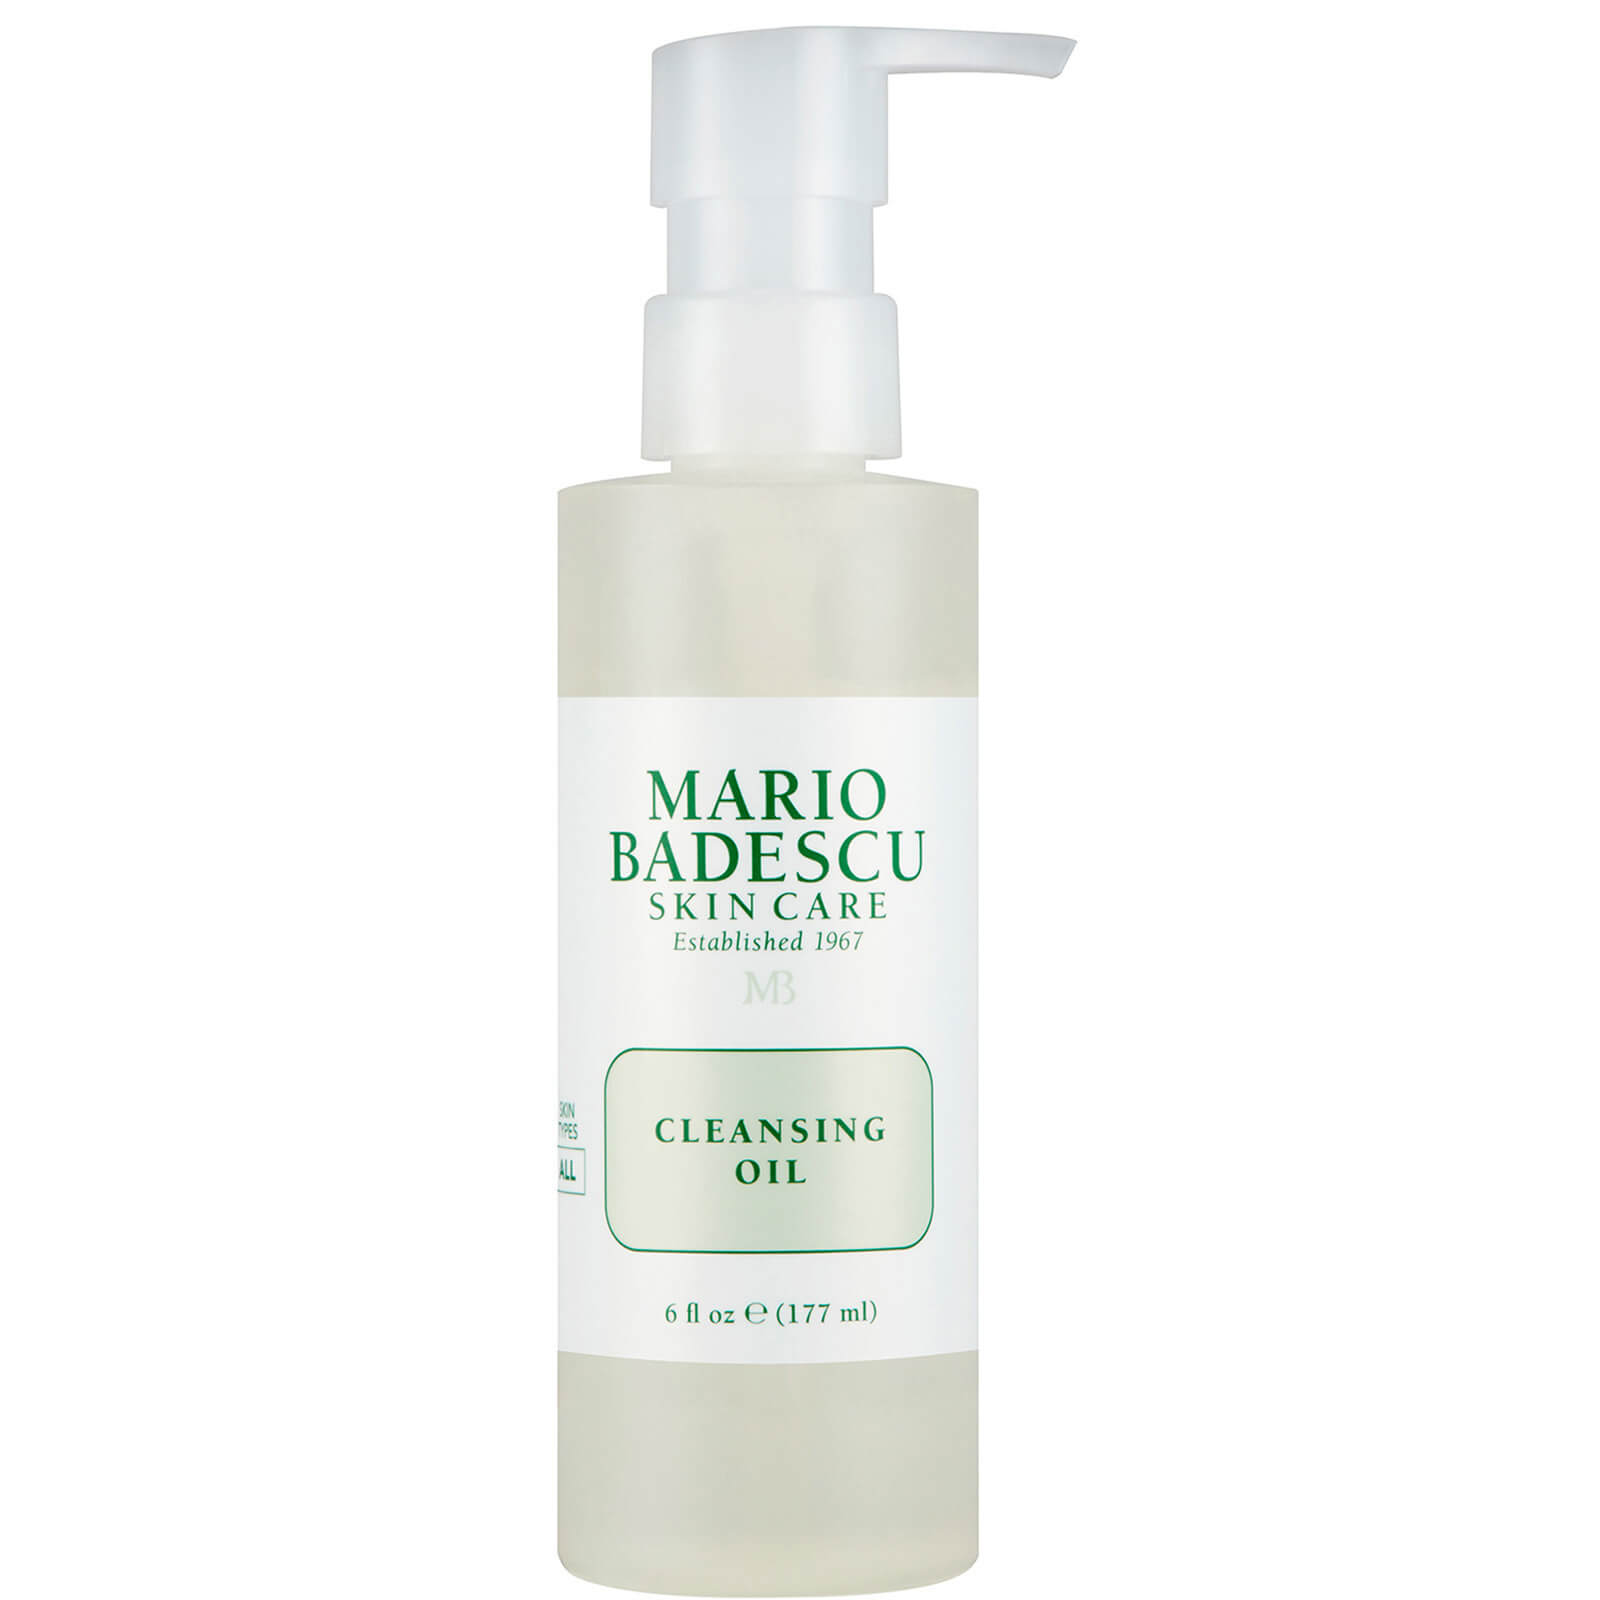 Photos - Facial / Body Cleansing Product Mario Badescu Cleansing Oil 117ml